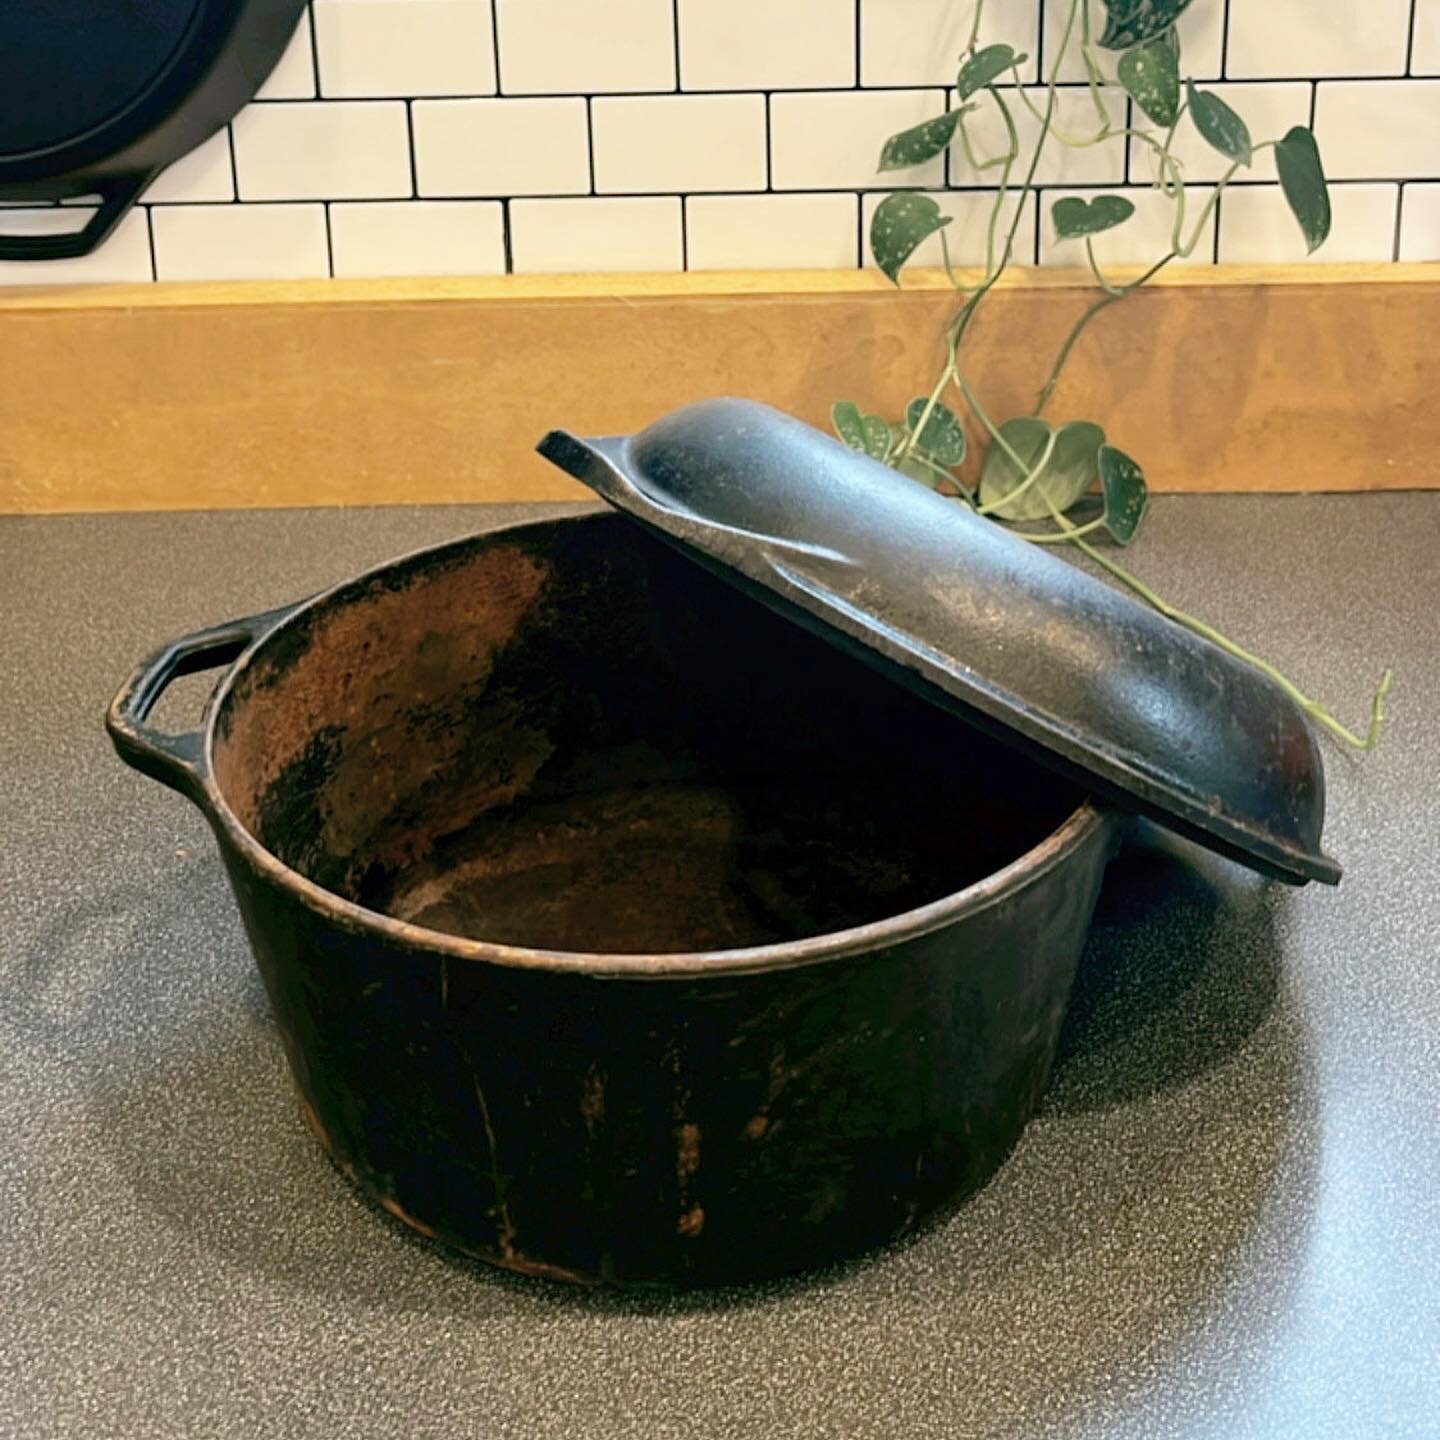 I really admire manufacturing pre-WW2 industrialization. Planned obsolescence wasn&rsquo;t a thing and items were built to last, be repaired and basically outlive us. 

Though this isn&rsquo;t a vintage piece, a cast-iron pan is an icon of a bygone e